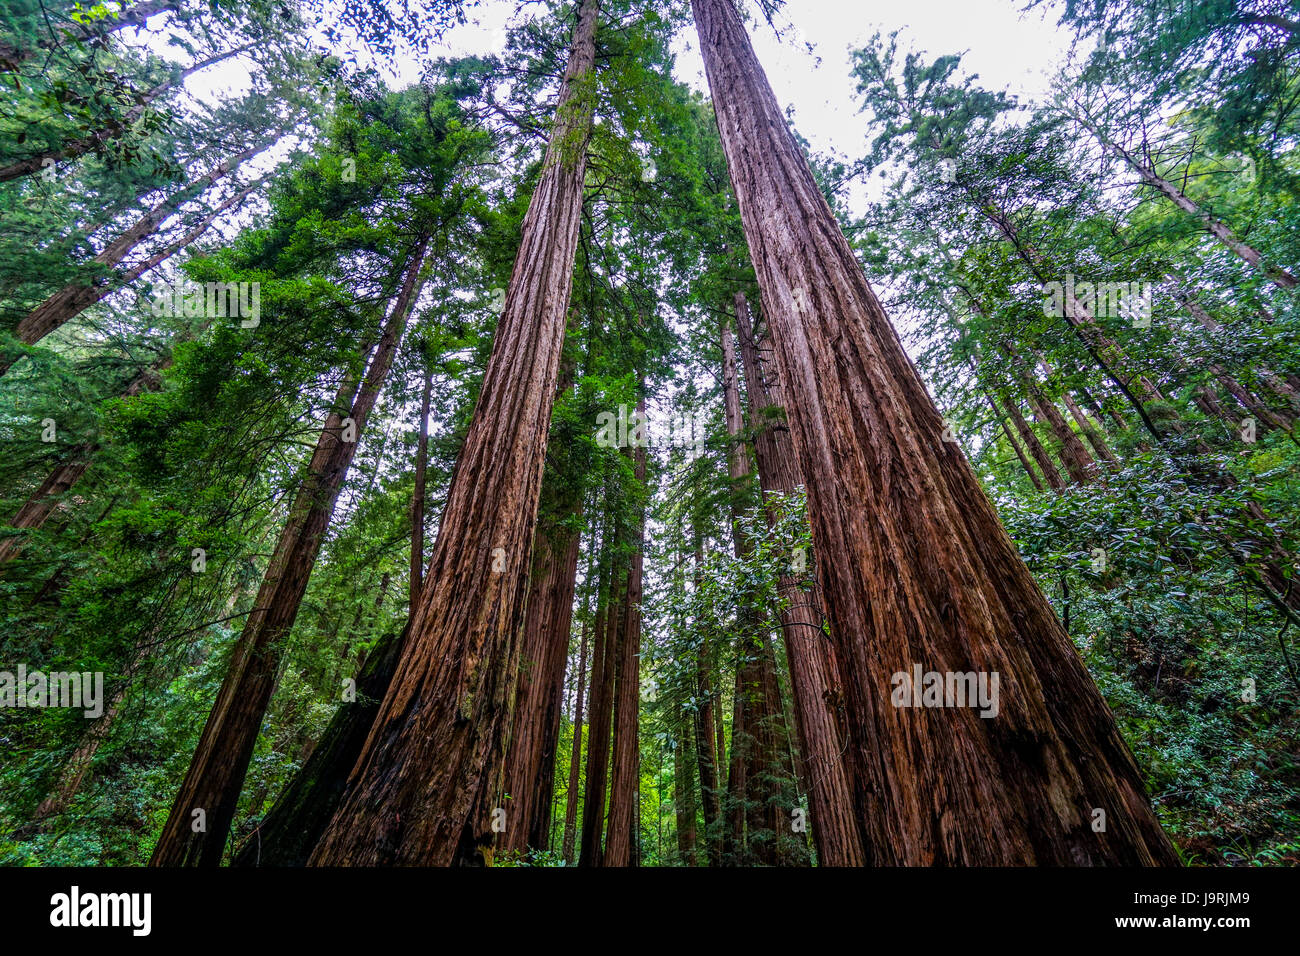 The tallest trees - Redwood forest in California Stock Photo